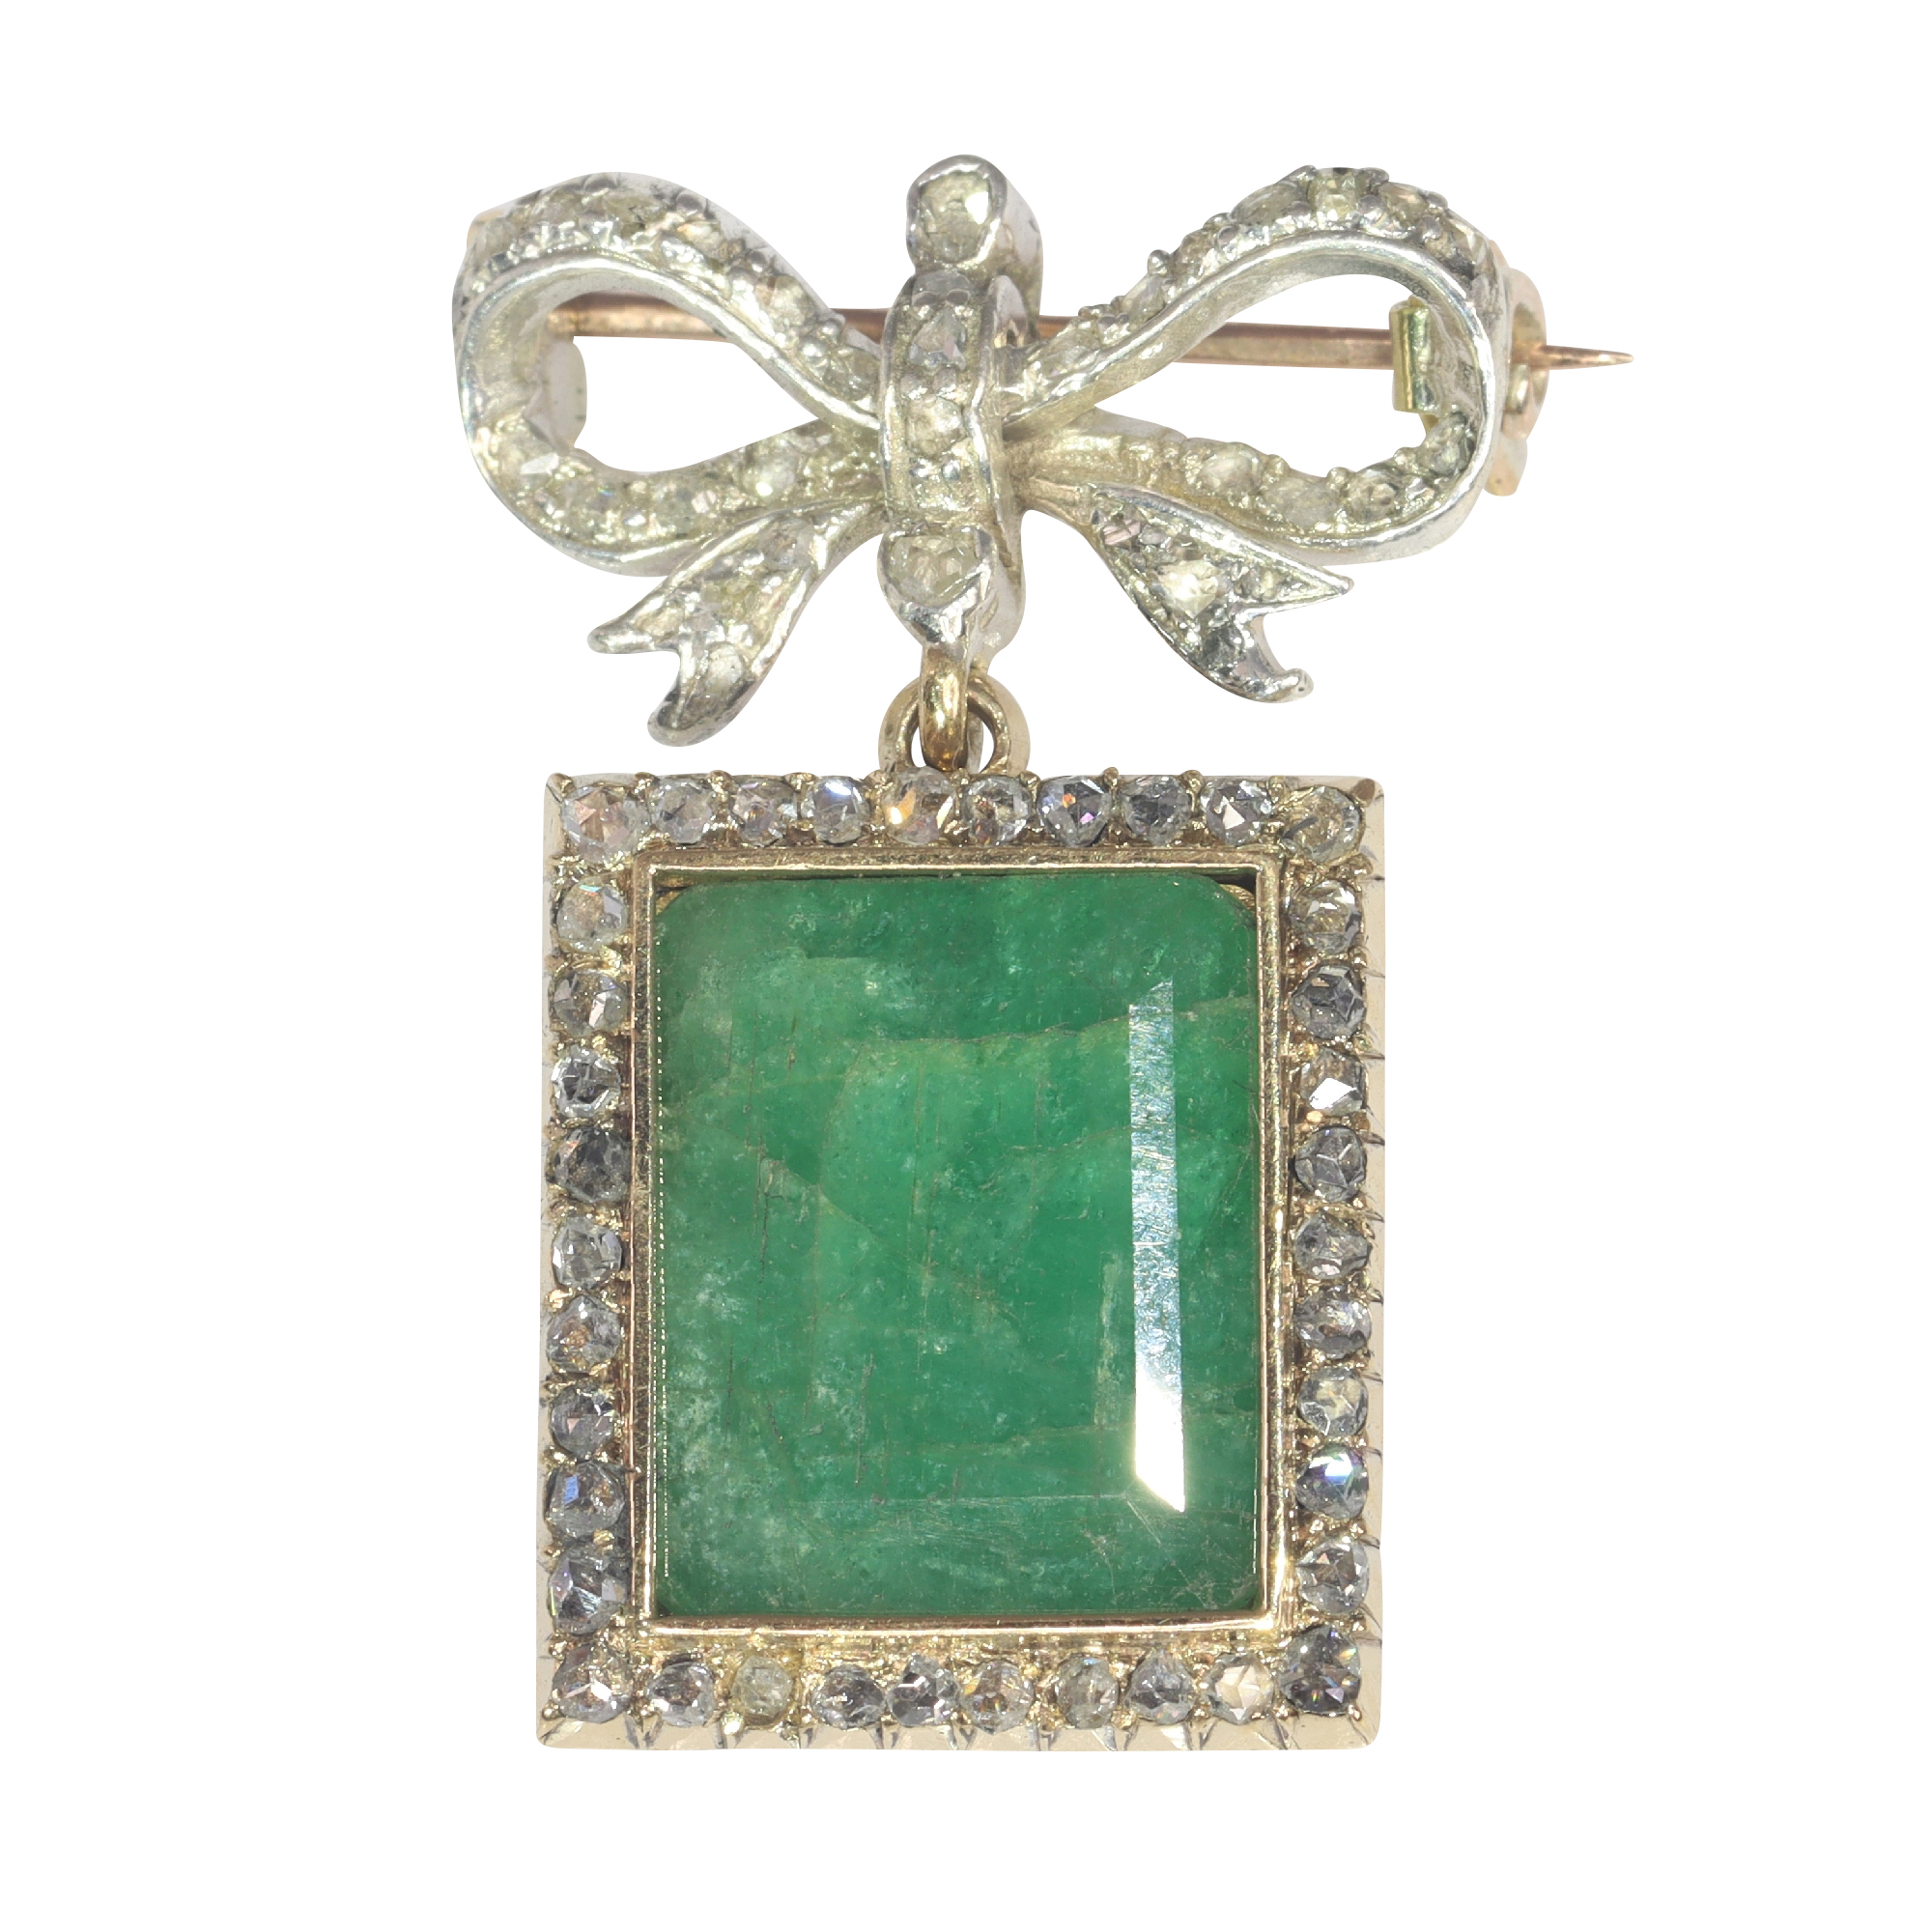 Timeless Charm: The Enchanting Victorian Bow Brooch